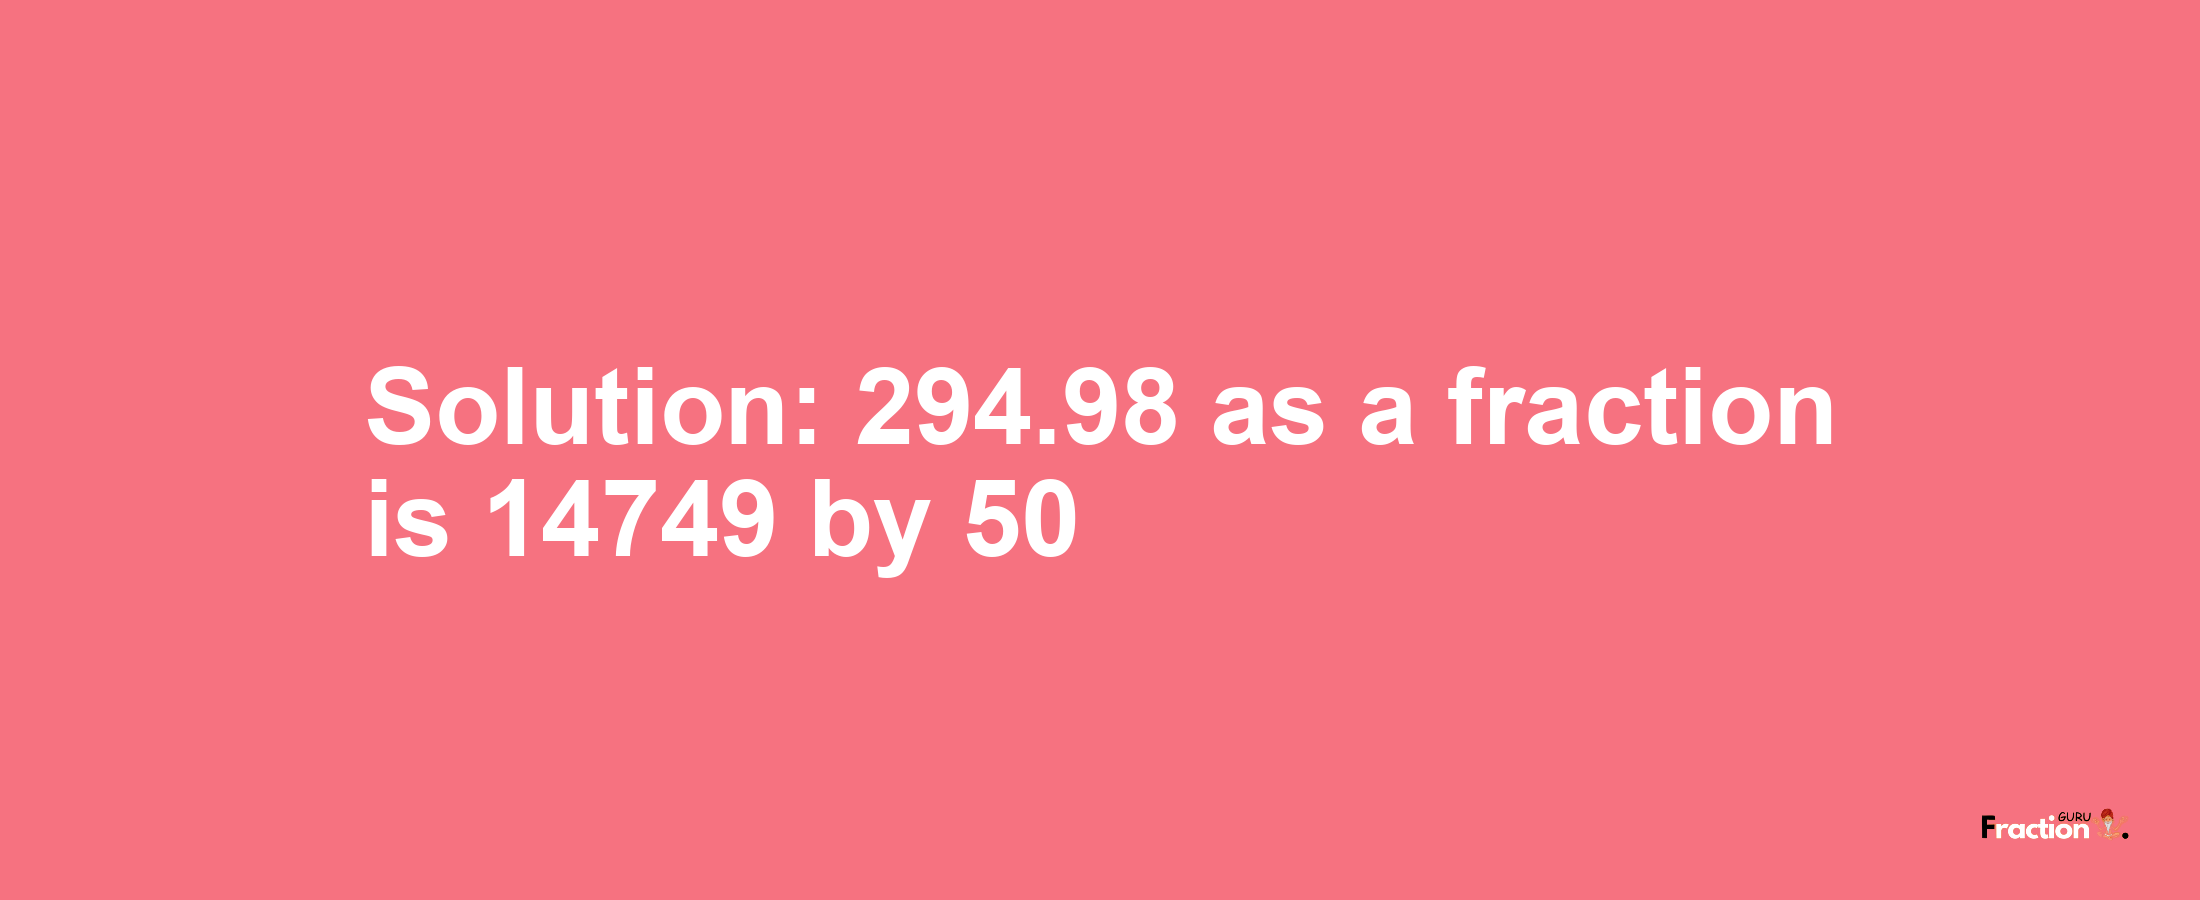 Solution:294.98 as a fraction is 14749/50